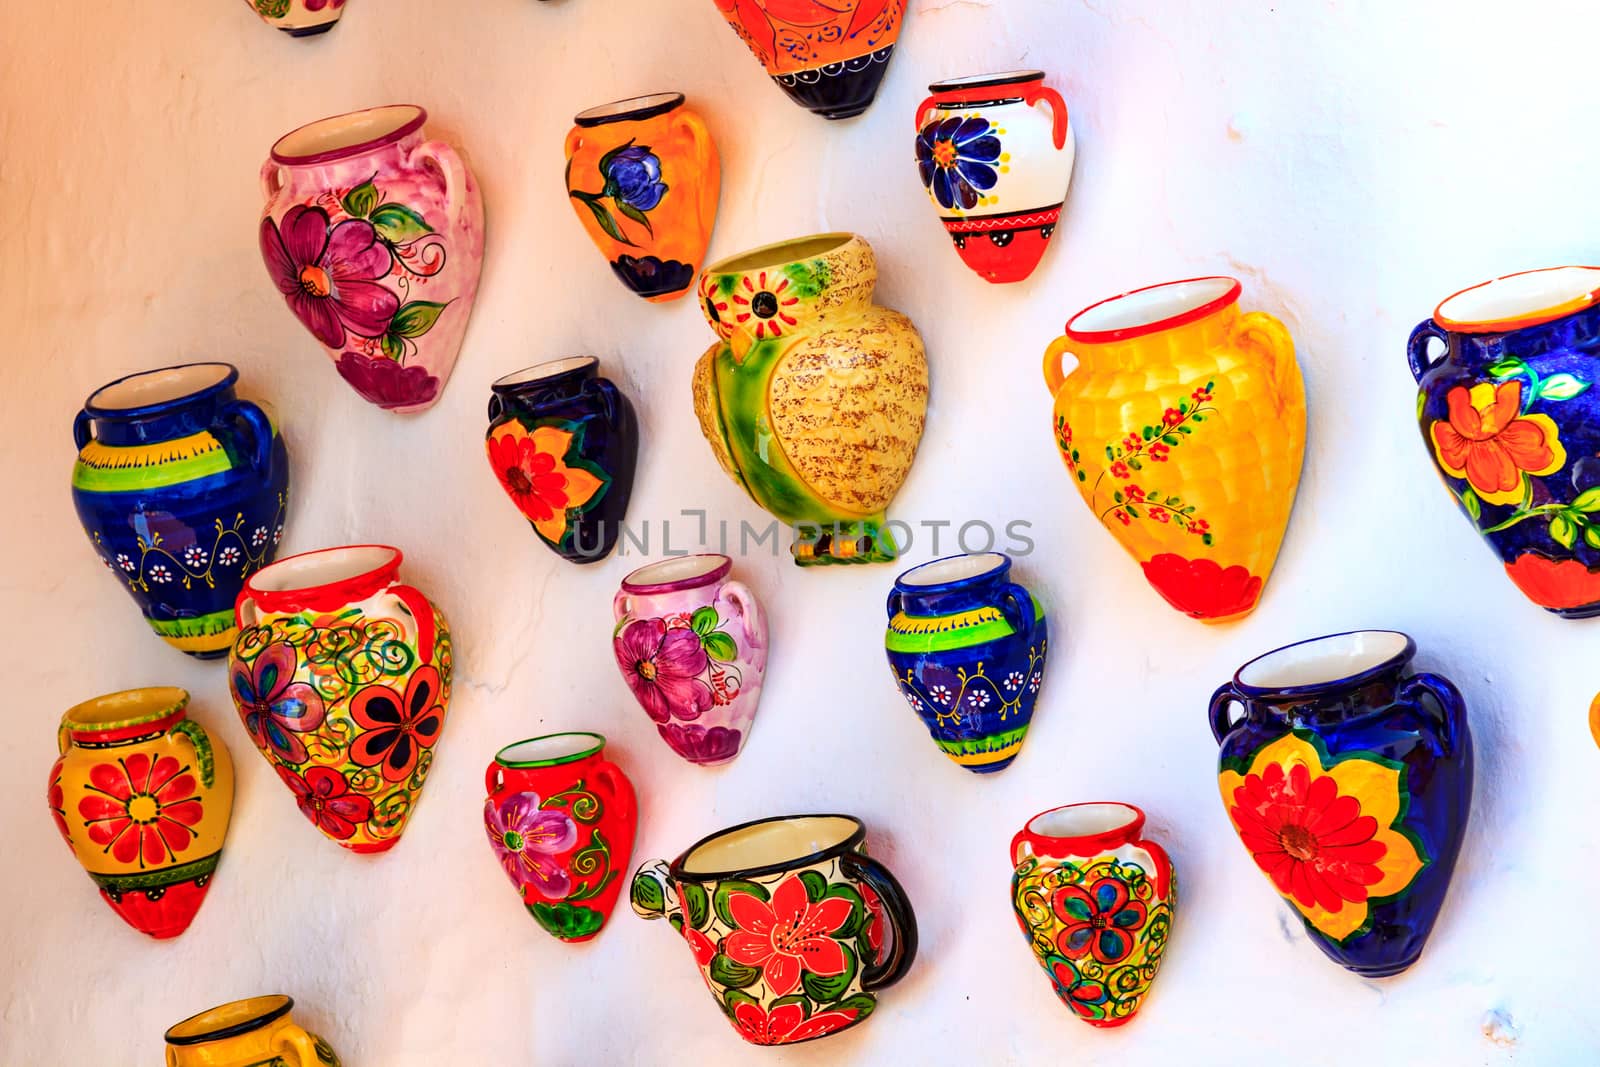 Colorful jugs on the wall